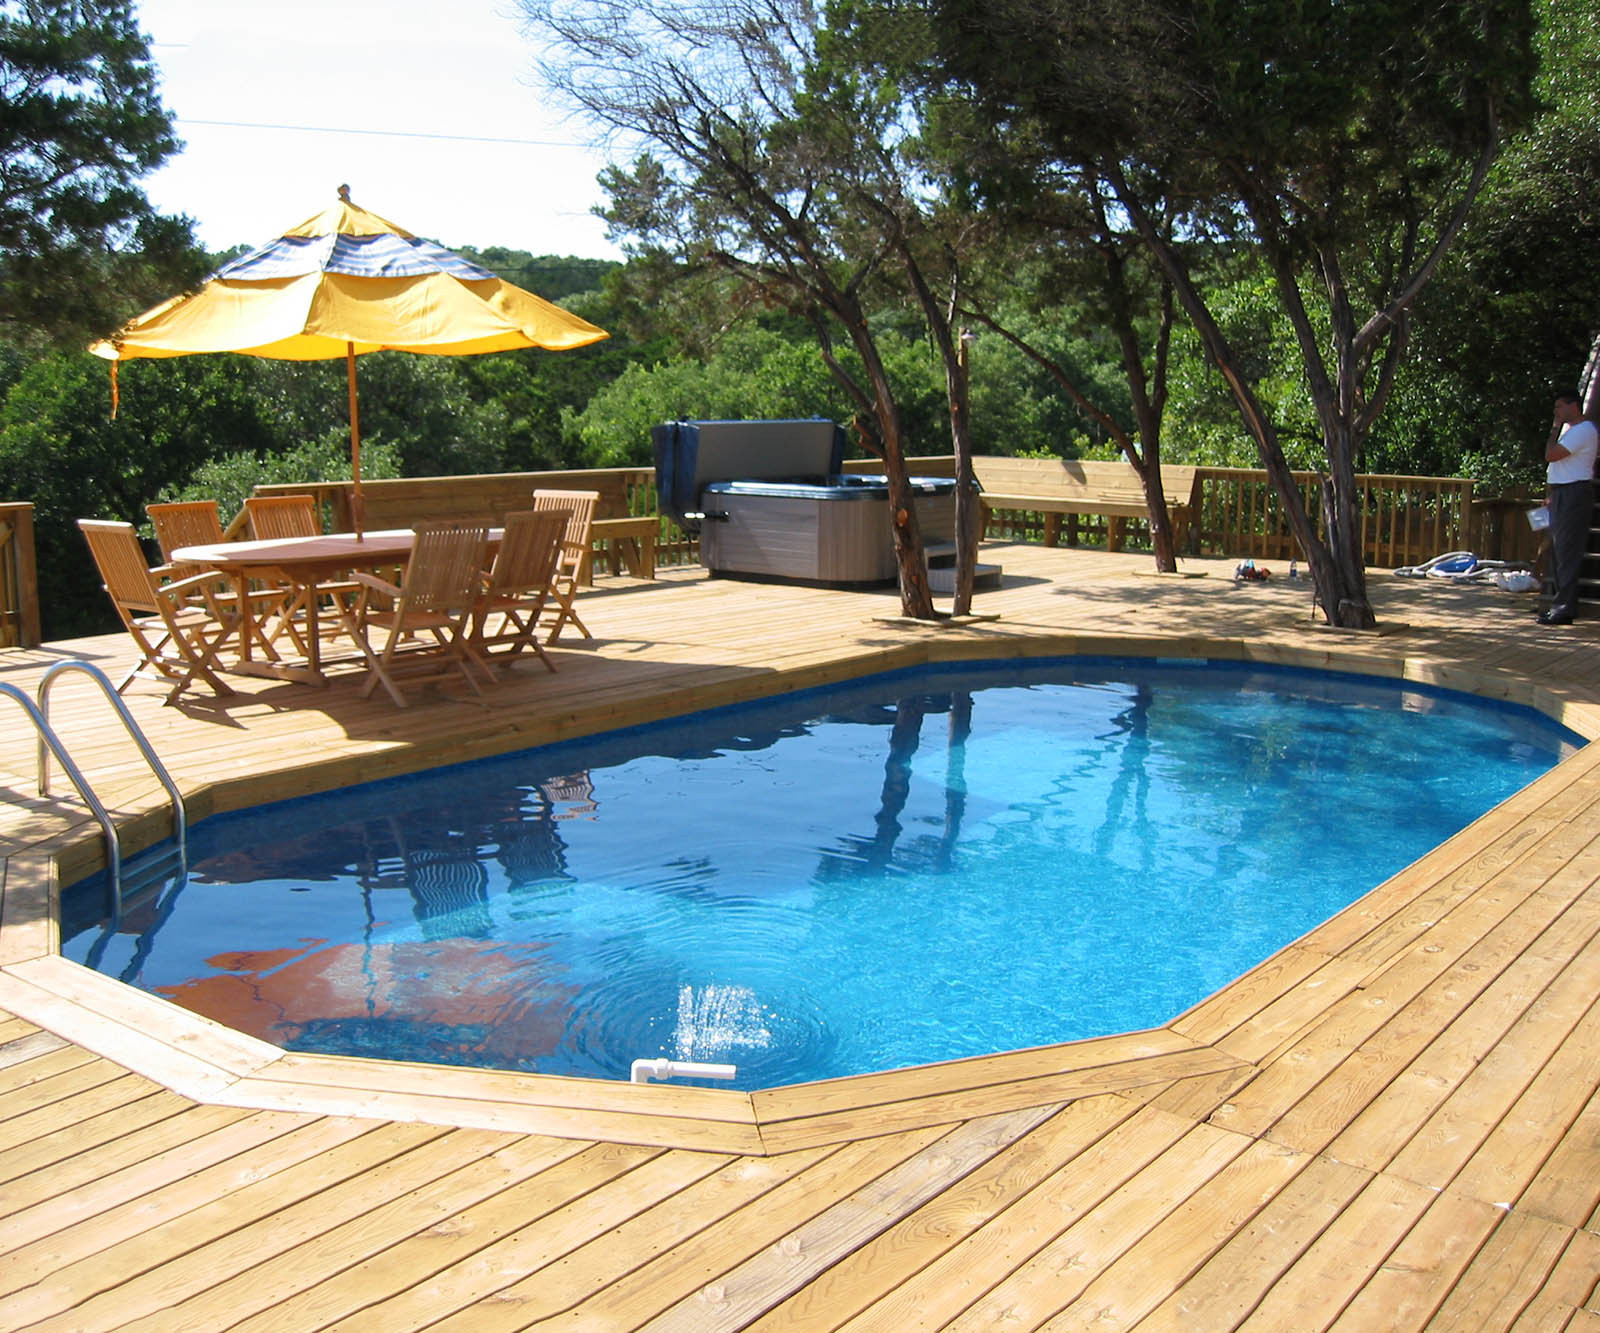 Above Ground Pool Decks Pictures
 Ground Pools with Decks Ideas to Get Inspirations